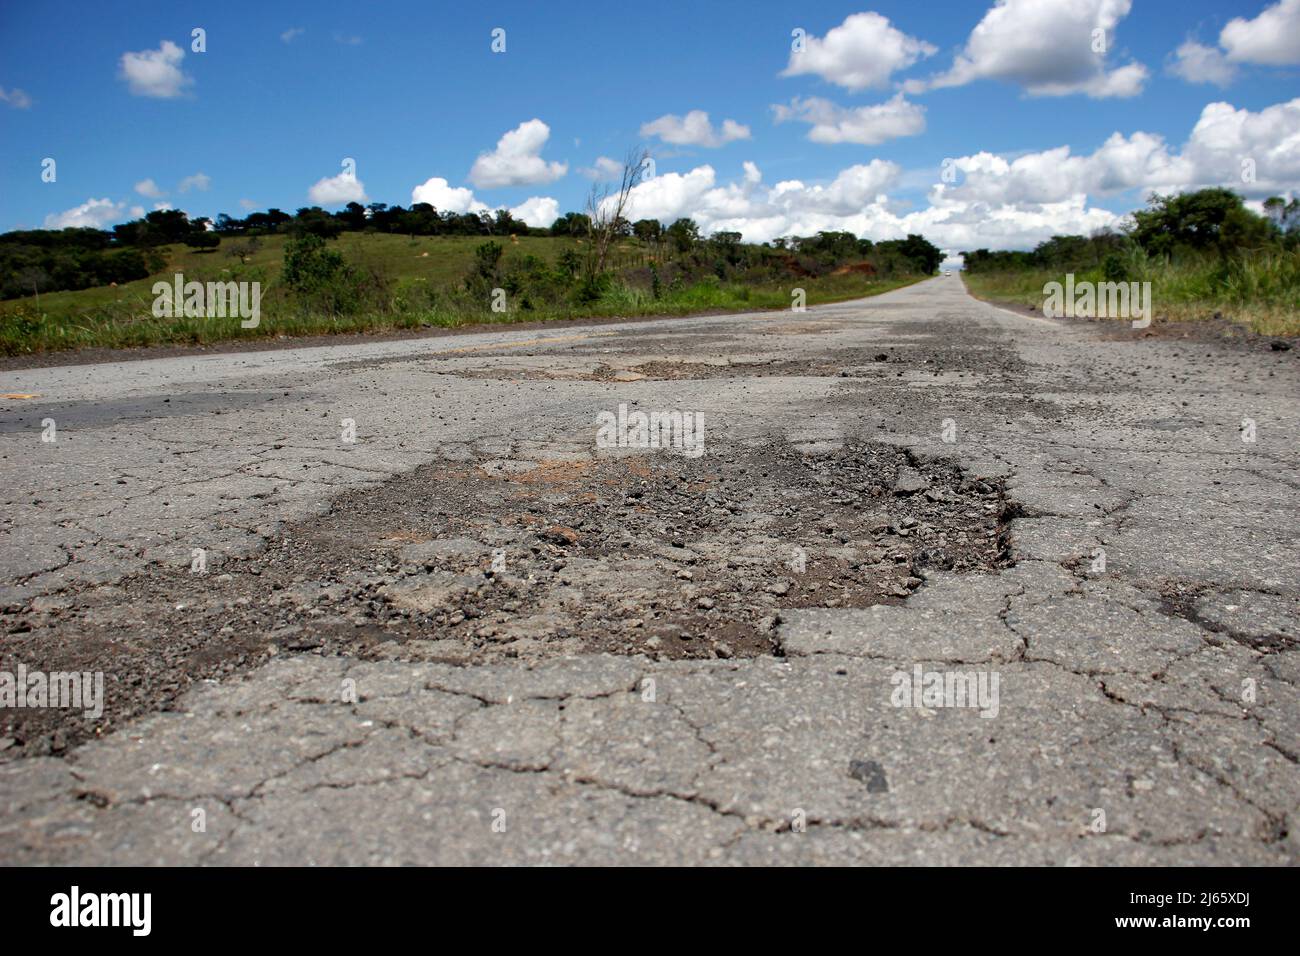 stretch of road with defective and spoiled asphalt, potholes and danger for traffic Stock Photo